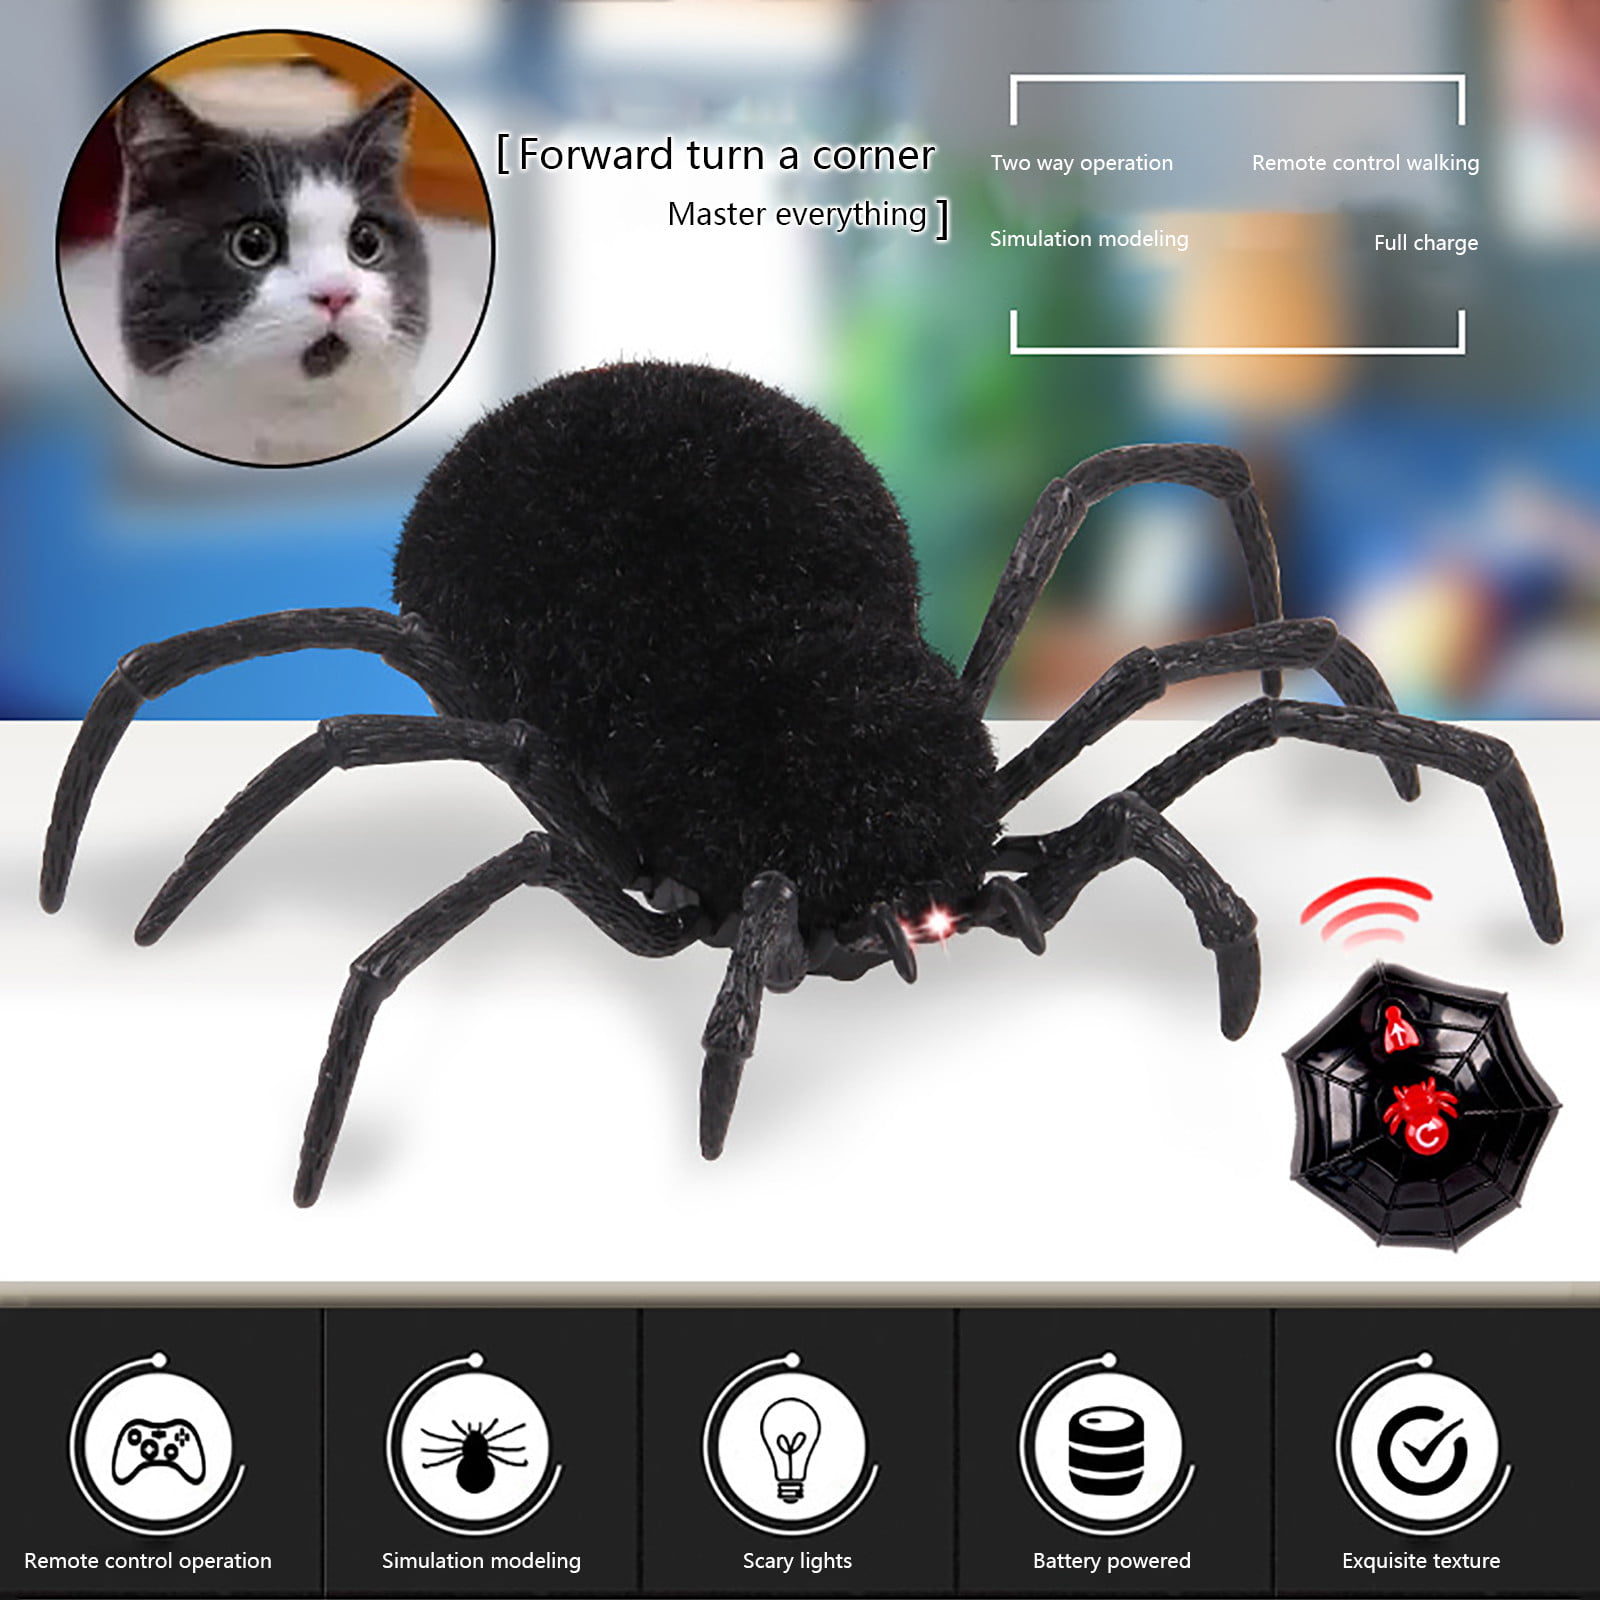 Tarantula Remote Control Flock Spider Moving Legs Scare Gag Gift Scary Halloween 